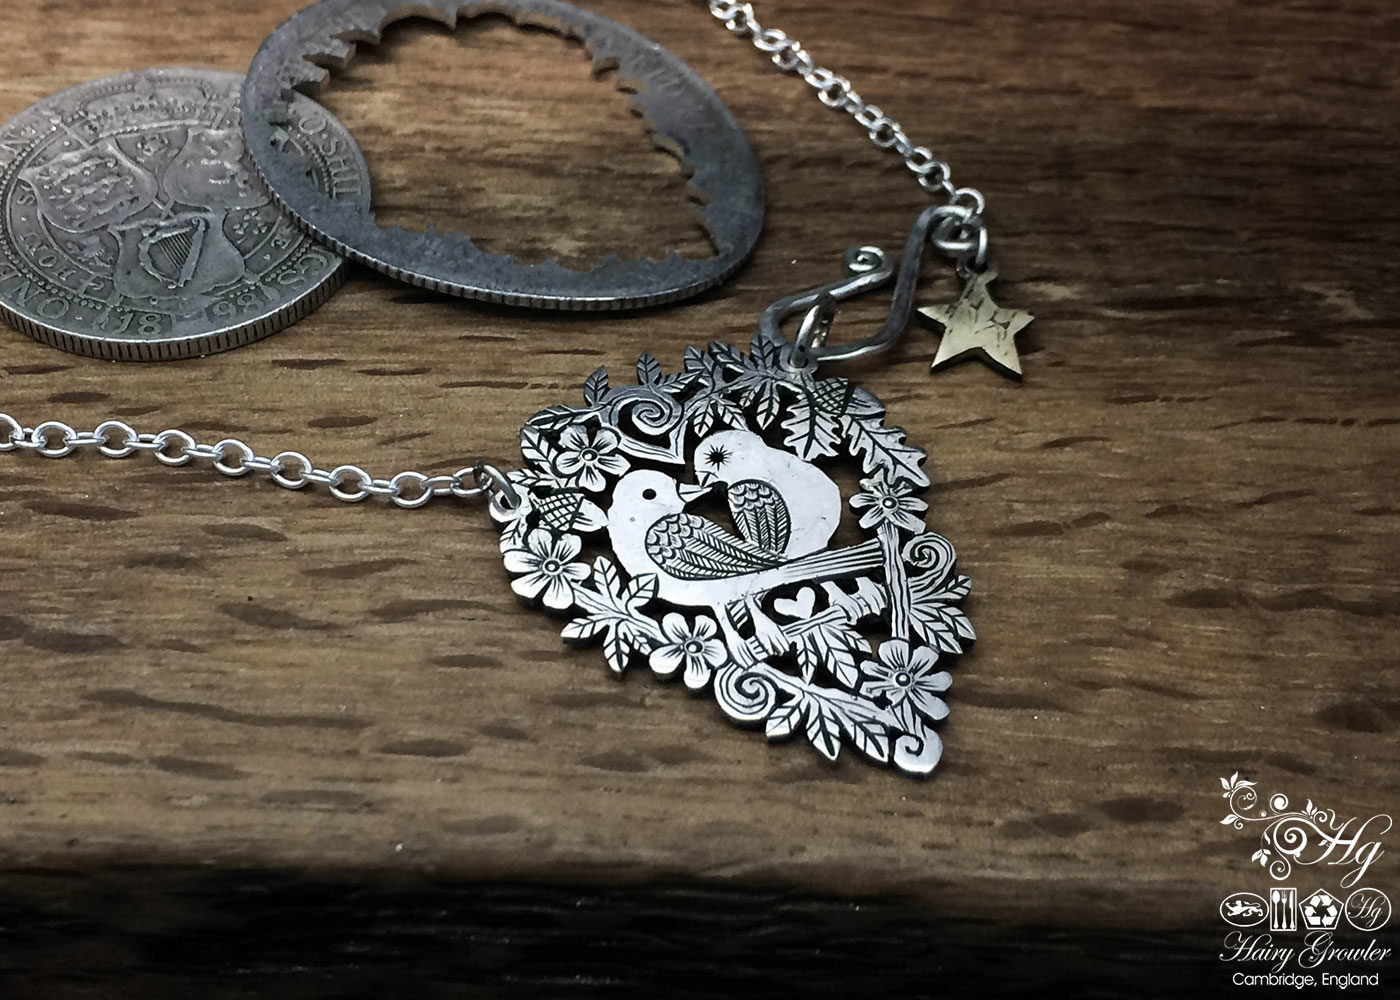 Handmade and upcycled sterling silver sweet lovebirds necklace